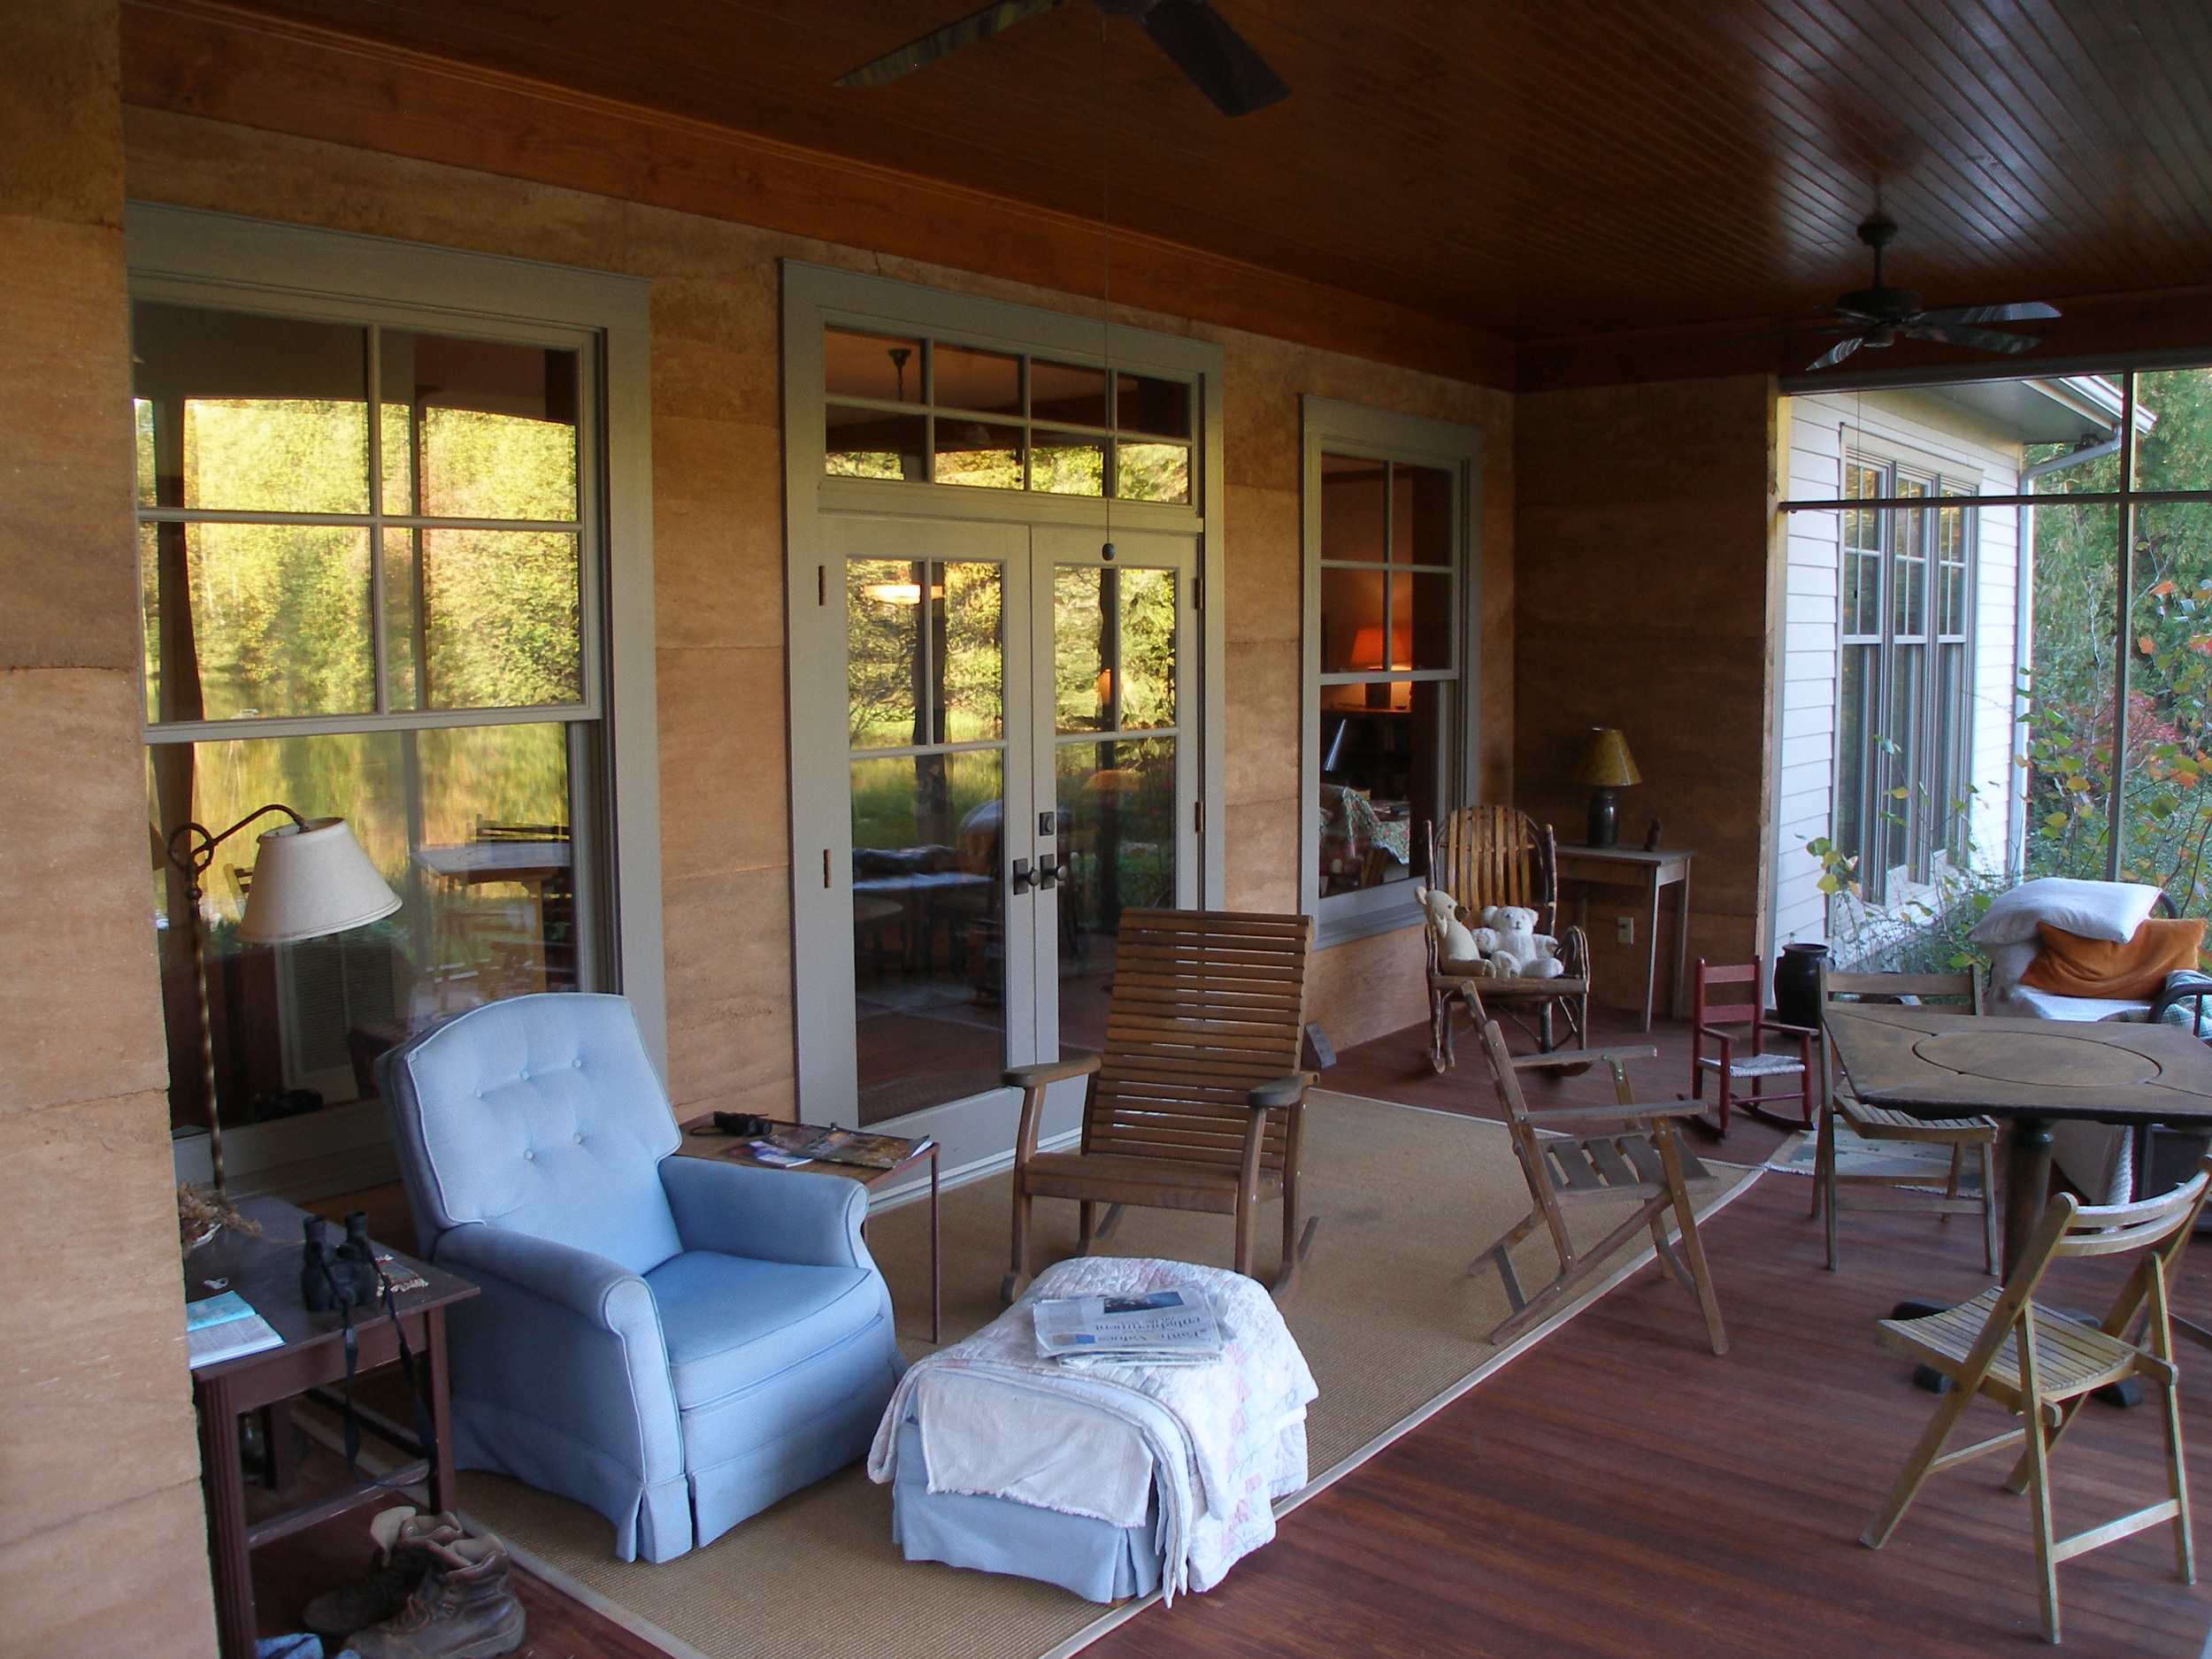 Screened in porch with rammed earth walls.